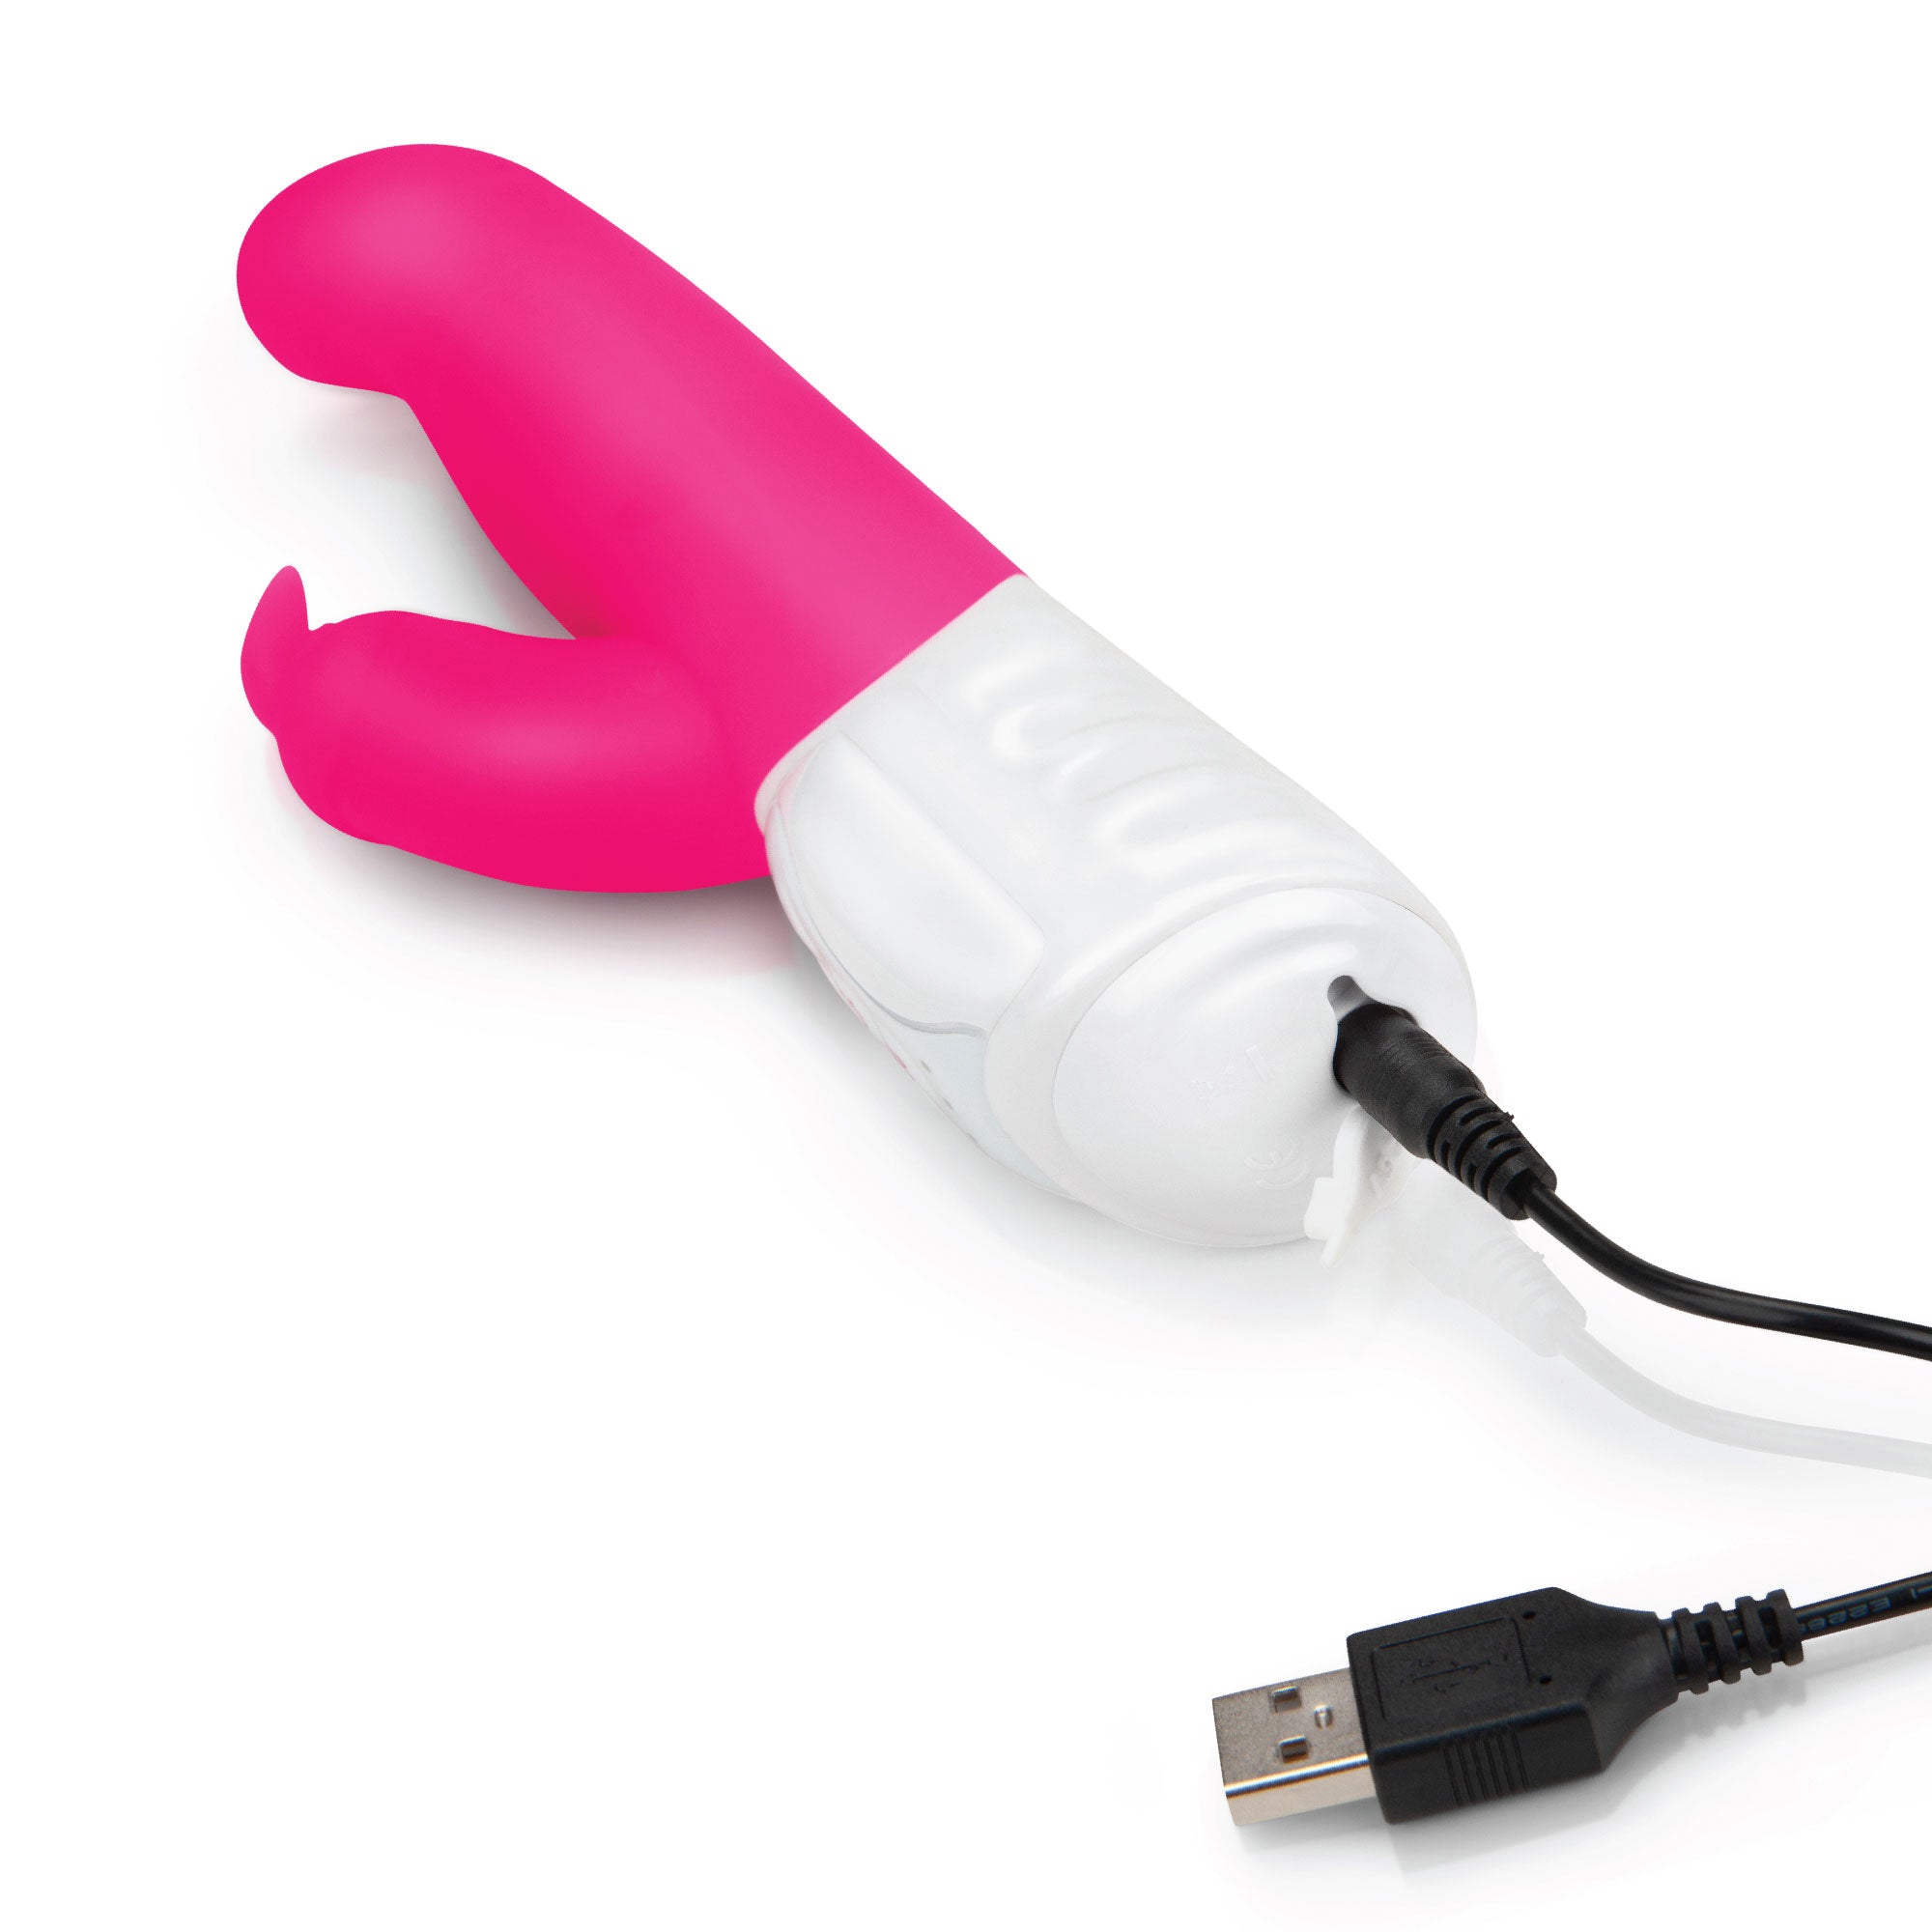 Rabbit Essentials G-Spot Rabbit Vibrator with Rotating Shaft in Pink with Charging Cable at glastoy.com